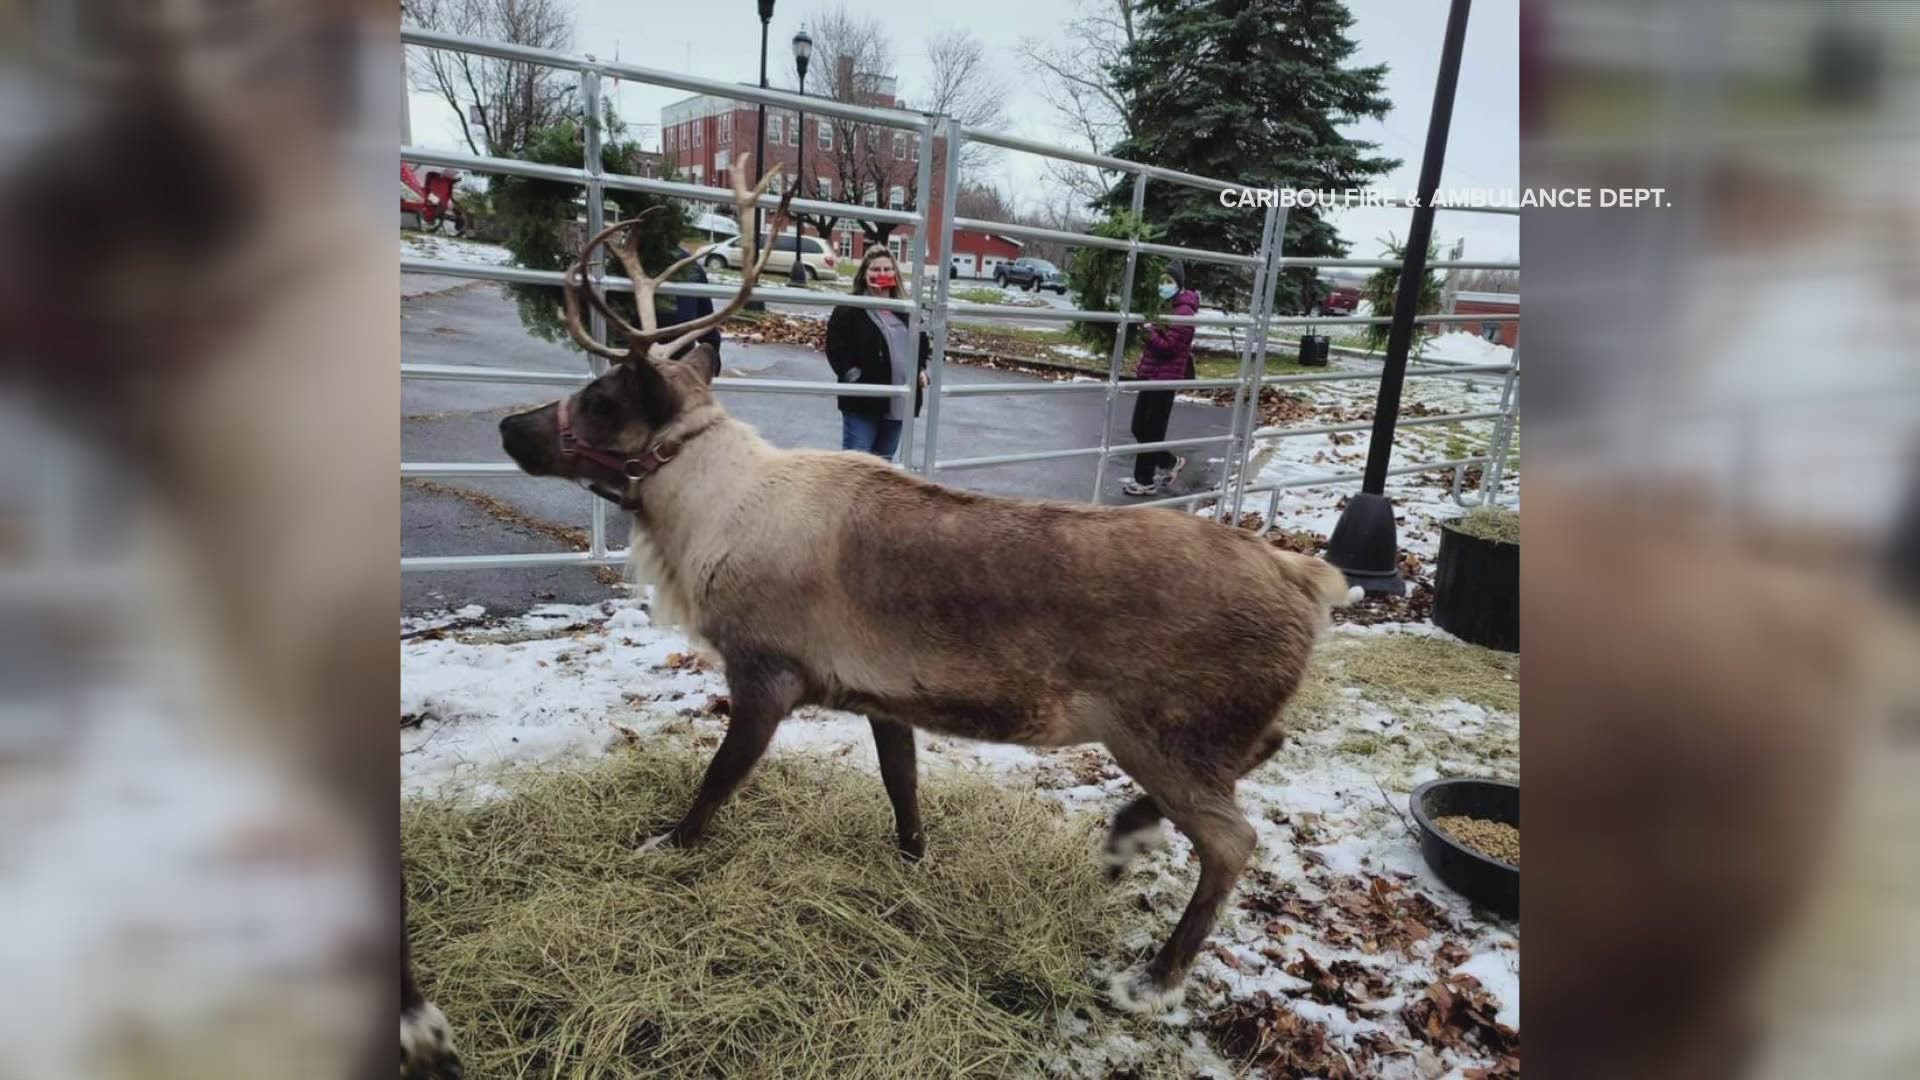 Caribou fire and ambulance department posted photos of Santa's reindeer visiting Lyndon square this weekend.